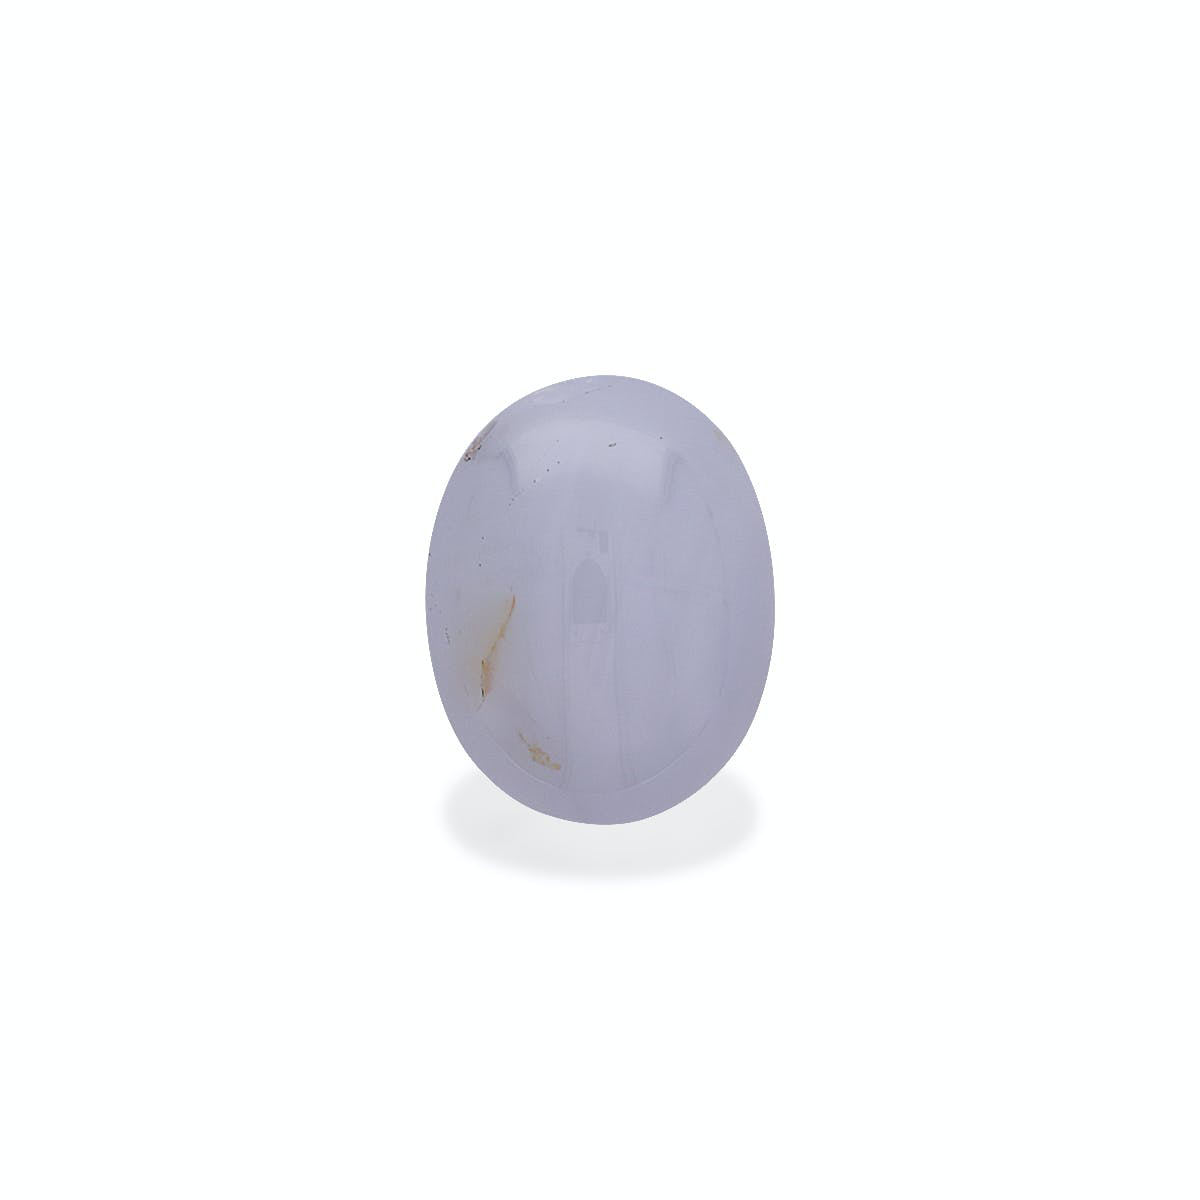 Picture of Star Sapphire 2.41ct - 8x6mm (SS0024)